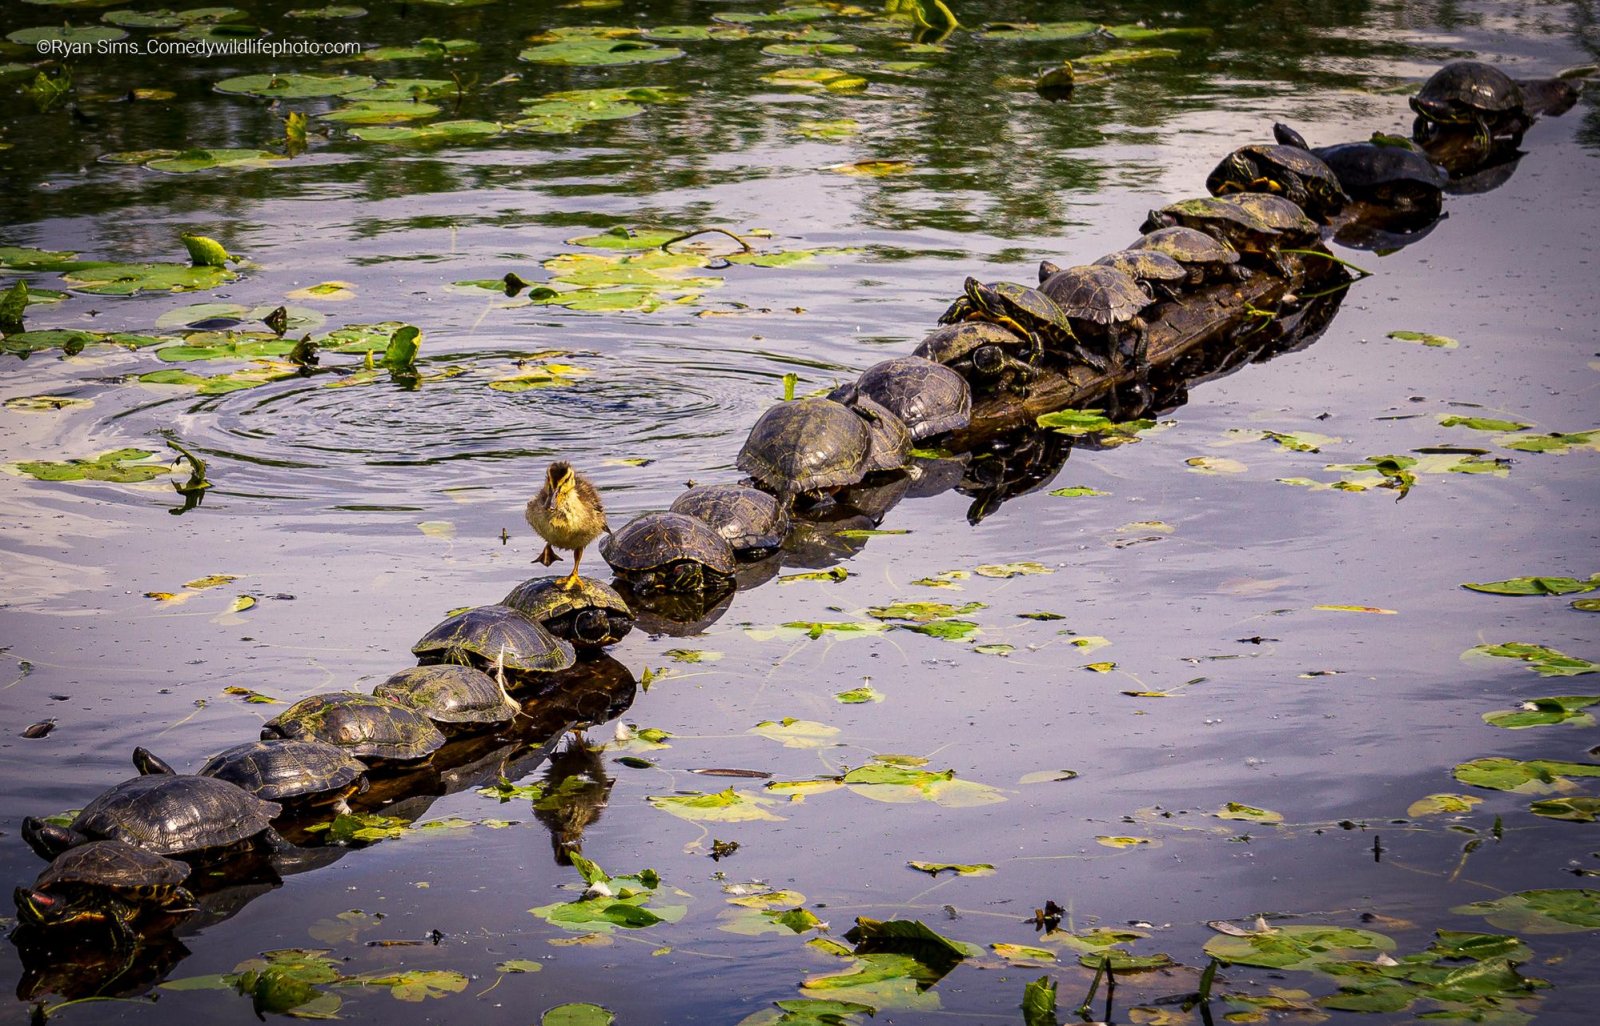 A duckling walks across a turtle covered log at the Juanita wetlands. Surrounded by green lilypads.